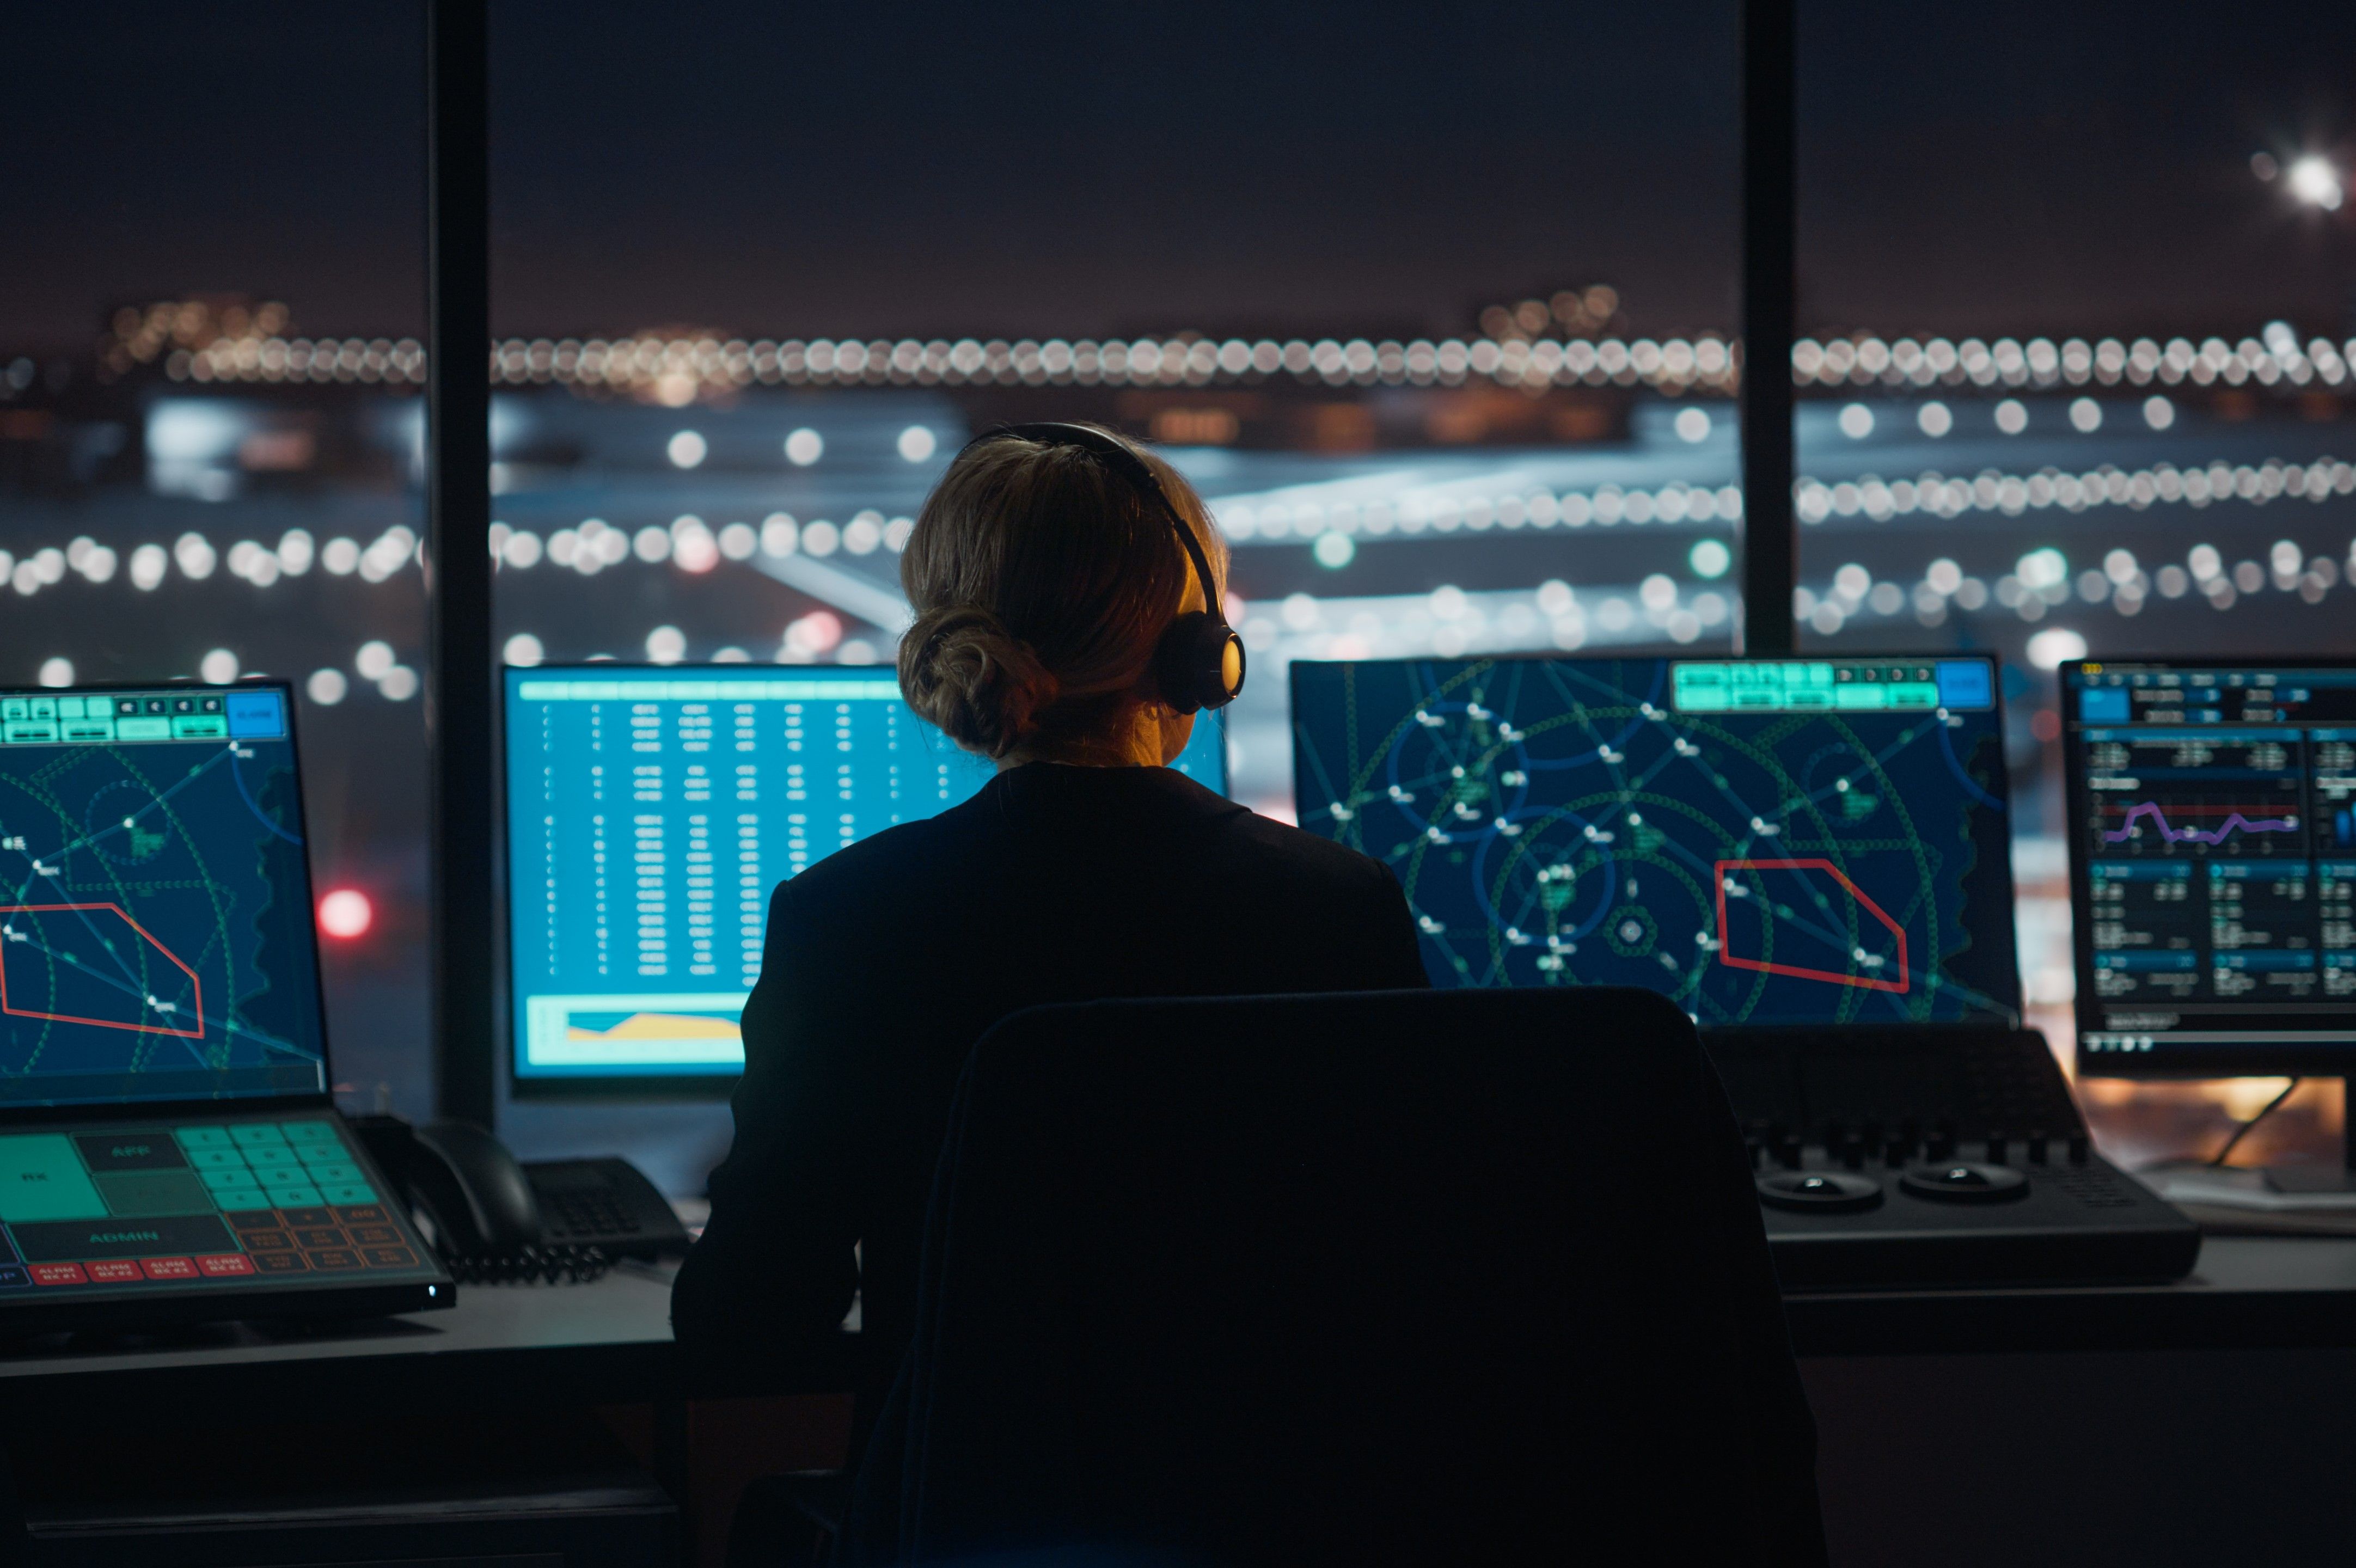 An air traffic controller working in the tower.